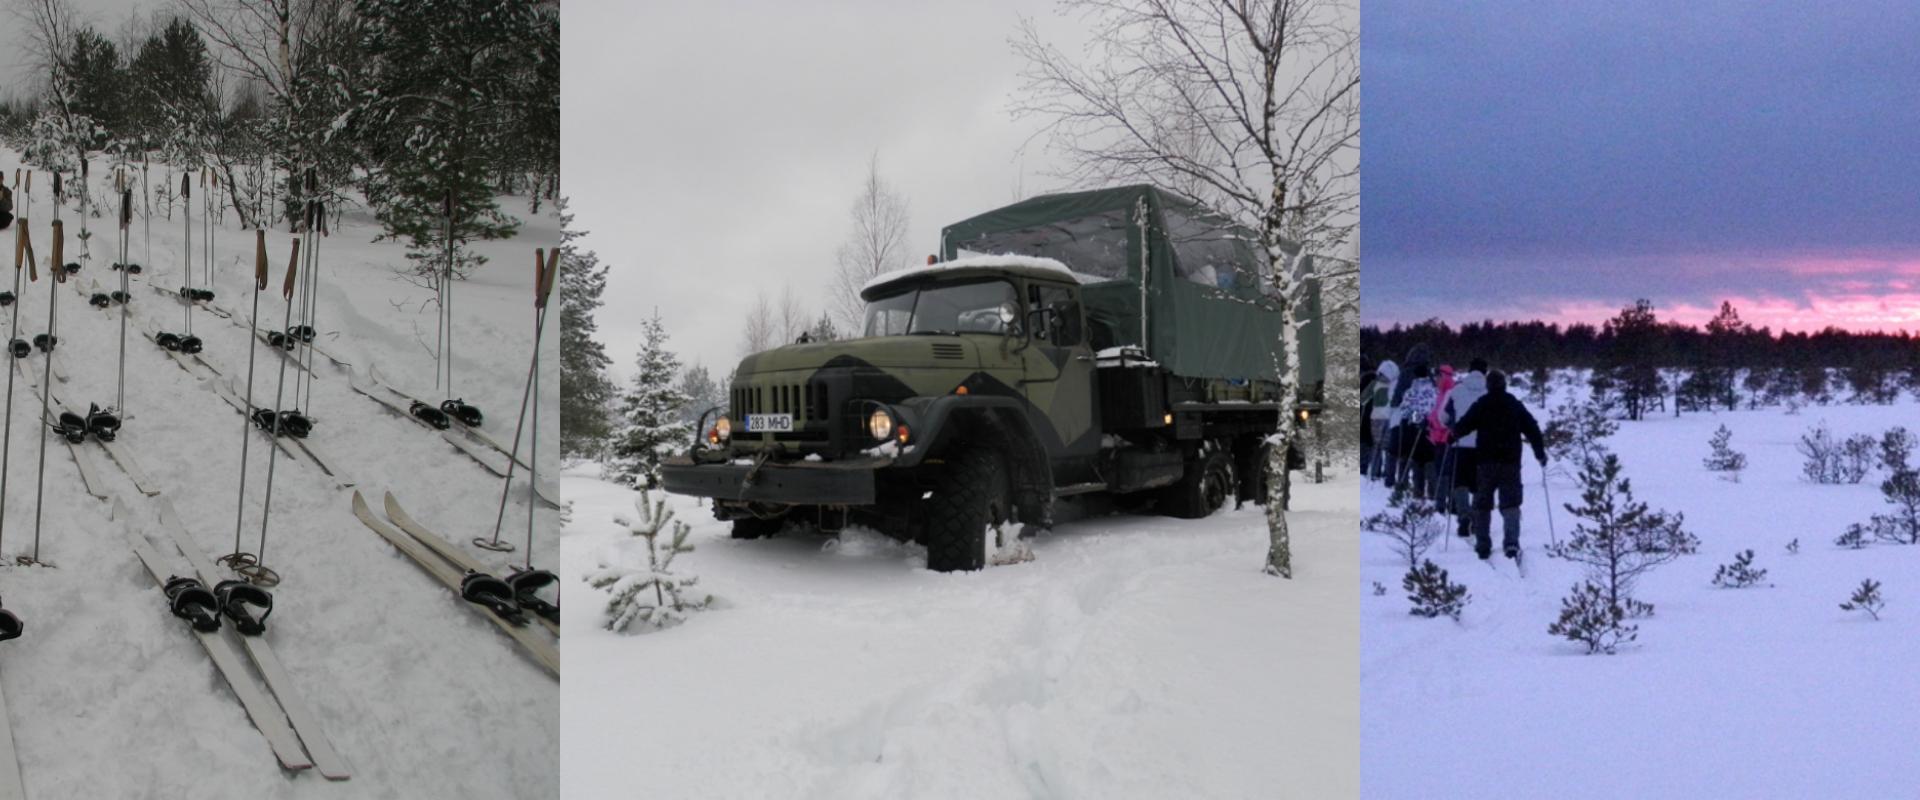 We will go on a hike with wide skis or snowshoes, which can be attached to every shoe. You will have an unforgettable bog hike experience in a ZIL131 